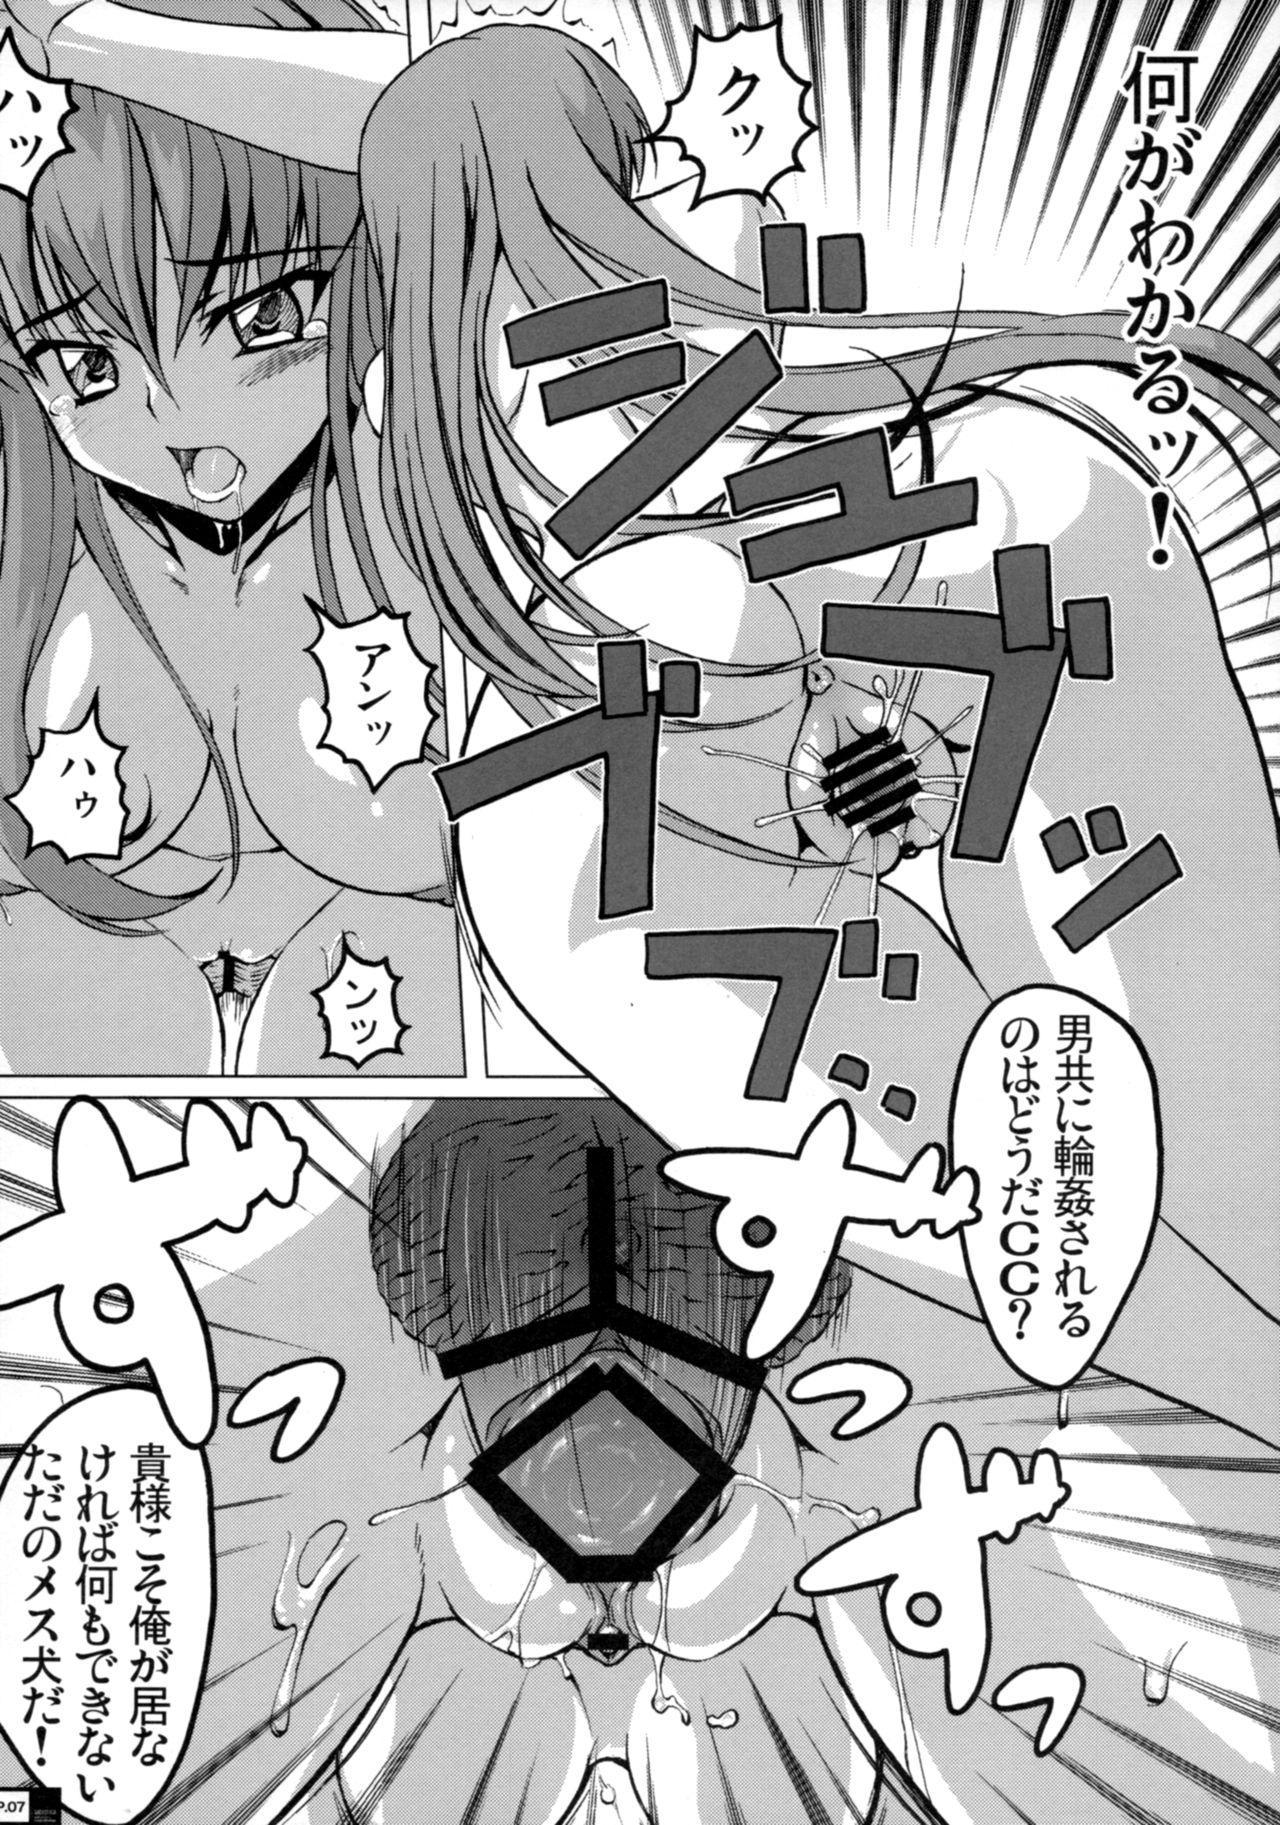 Spreading Sadistic Mastervation - Code geass Classic - Page 6